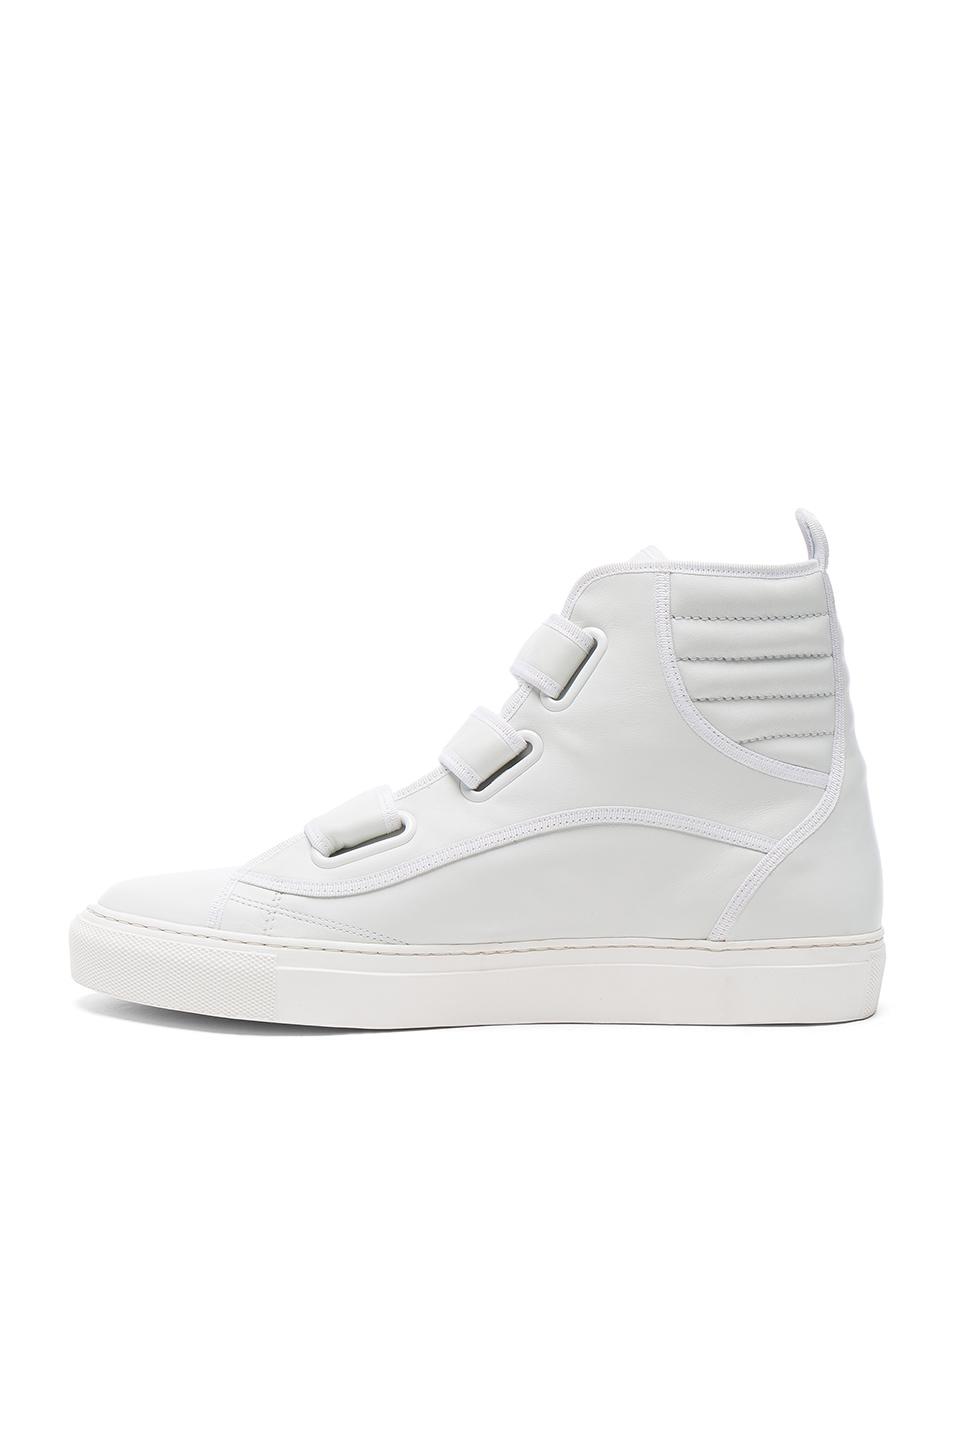 Raf Simons High Top Velcro Sneakers in White | Lyst